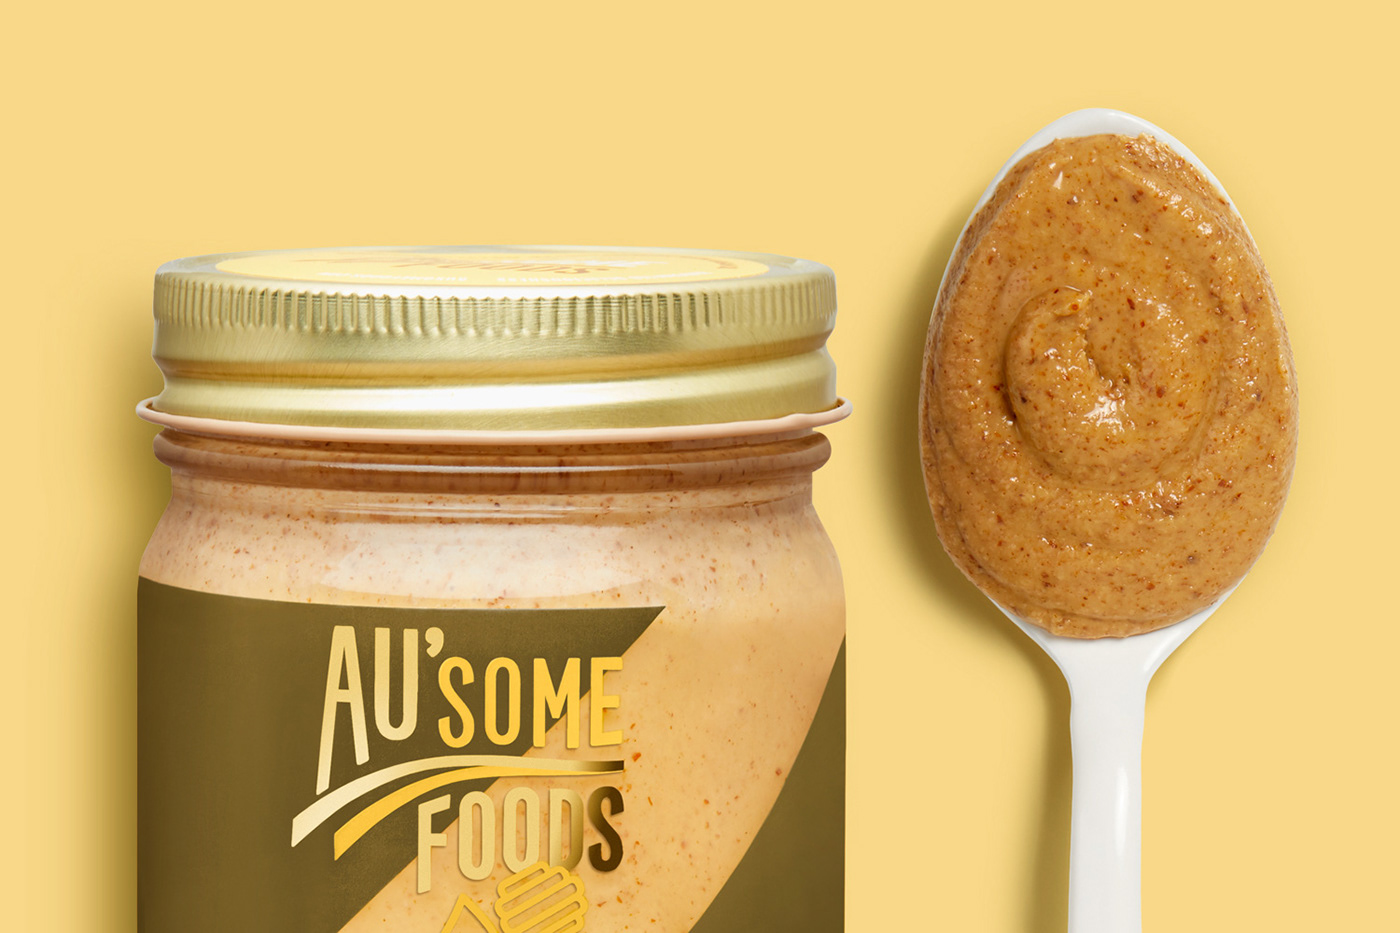 Au'some Foods is a Washington ,D.C.-based company committed to craftin...